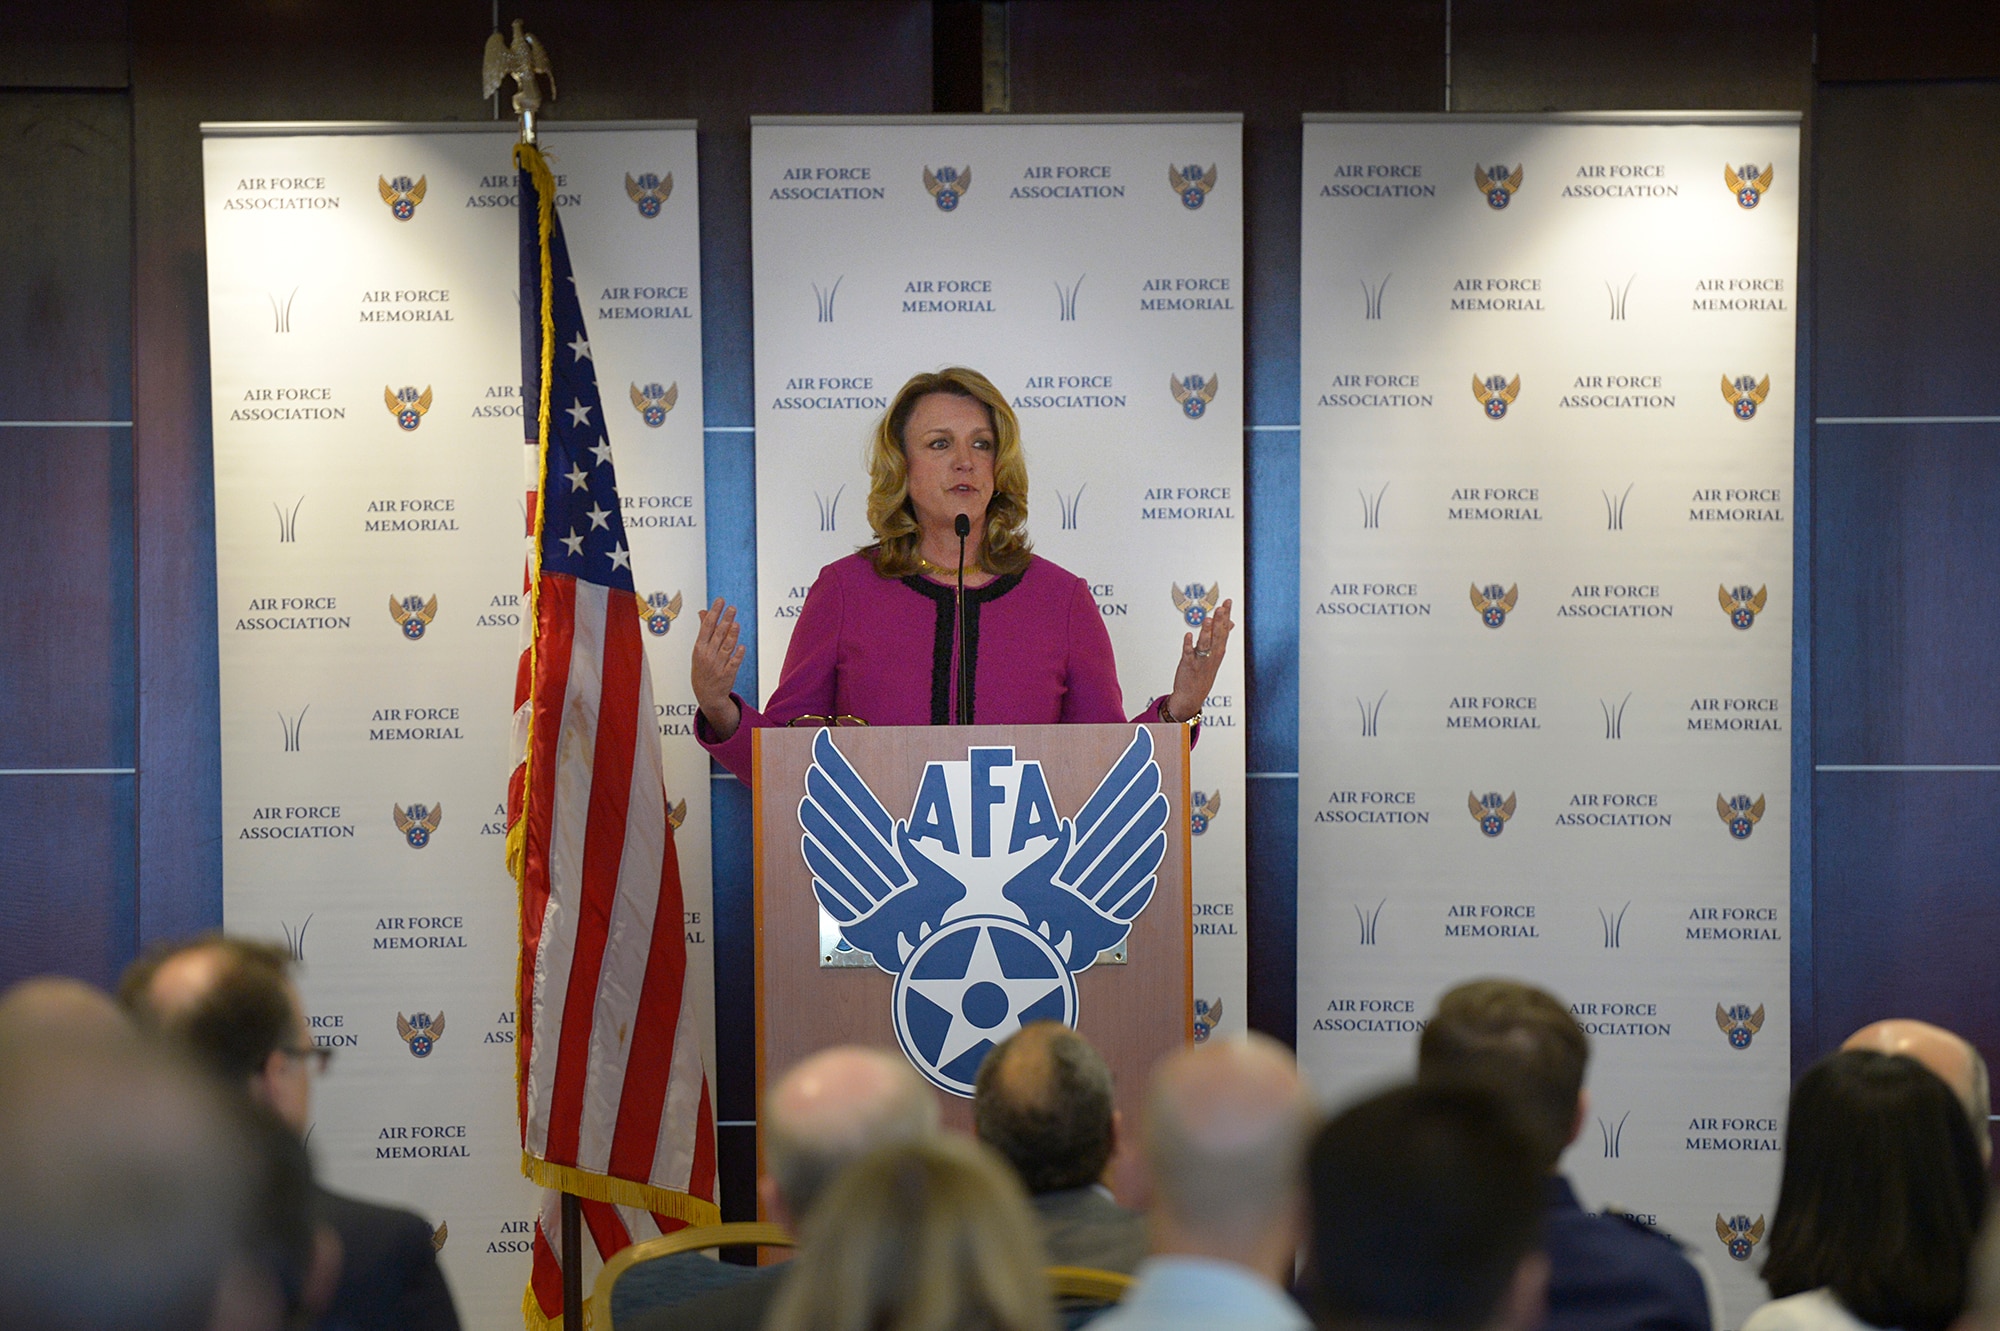 Air Force Secretary Deborah Lee James speaks to attendees at the Air Force Association's Breakfast Series in Arlington, Va., Jan. 6, 2017. The Air Force Association's Breakfast Series brings together industry partners, the international attaché corps and both military and civilian leadership for informative briefings on a monthly basis for updates on relevant current initiatives. (U.S. Air Force photo/Tech. Sgt. Joshua L. DeMotts)